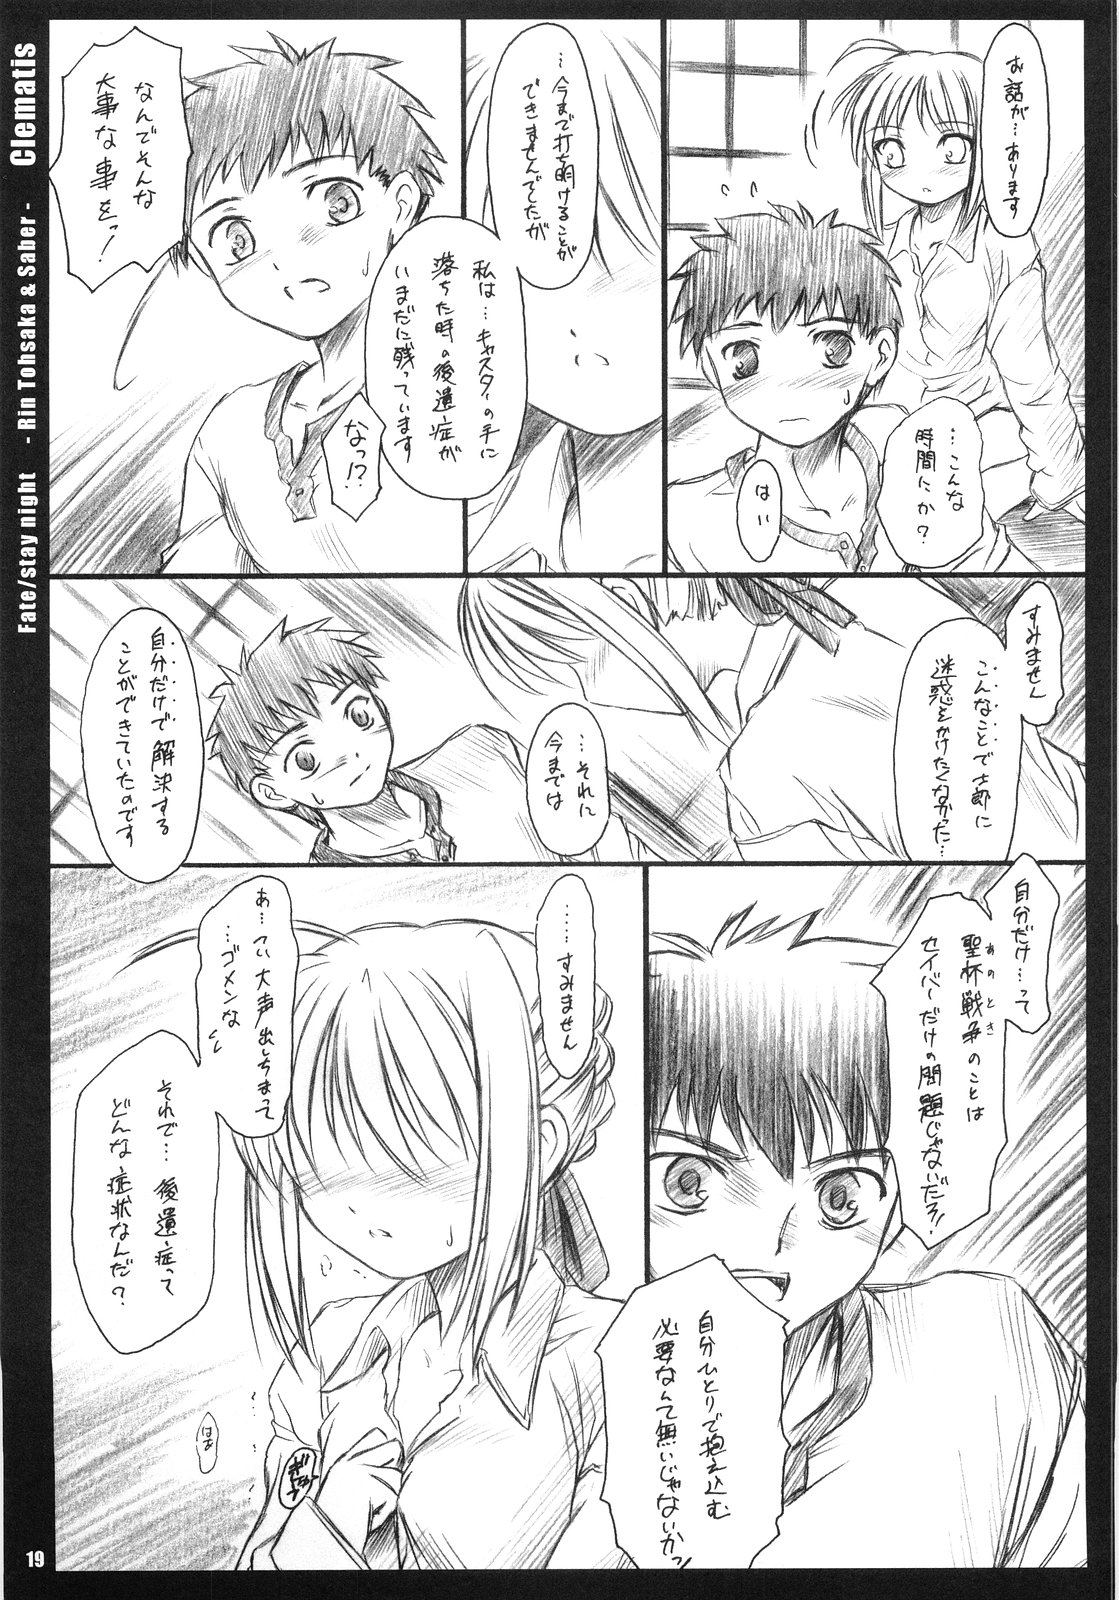 (C68) [Yakan Hikou (Inoue Tommy)] Clematis (Fate/stay night) page 18 full